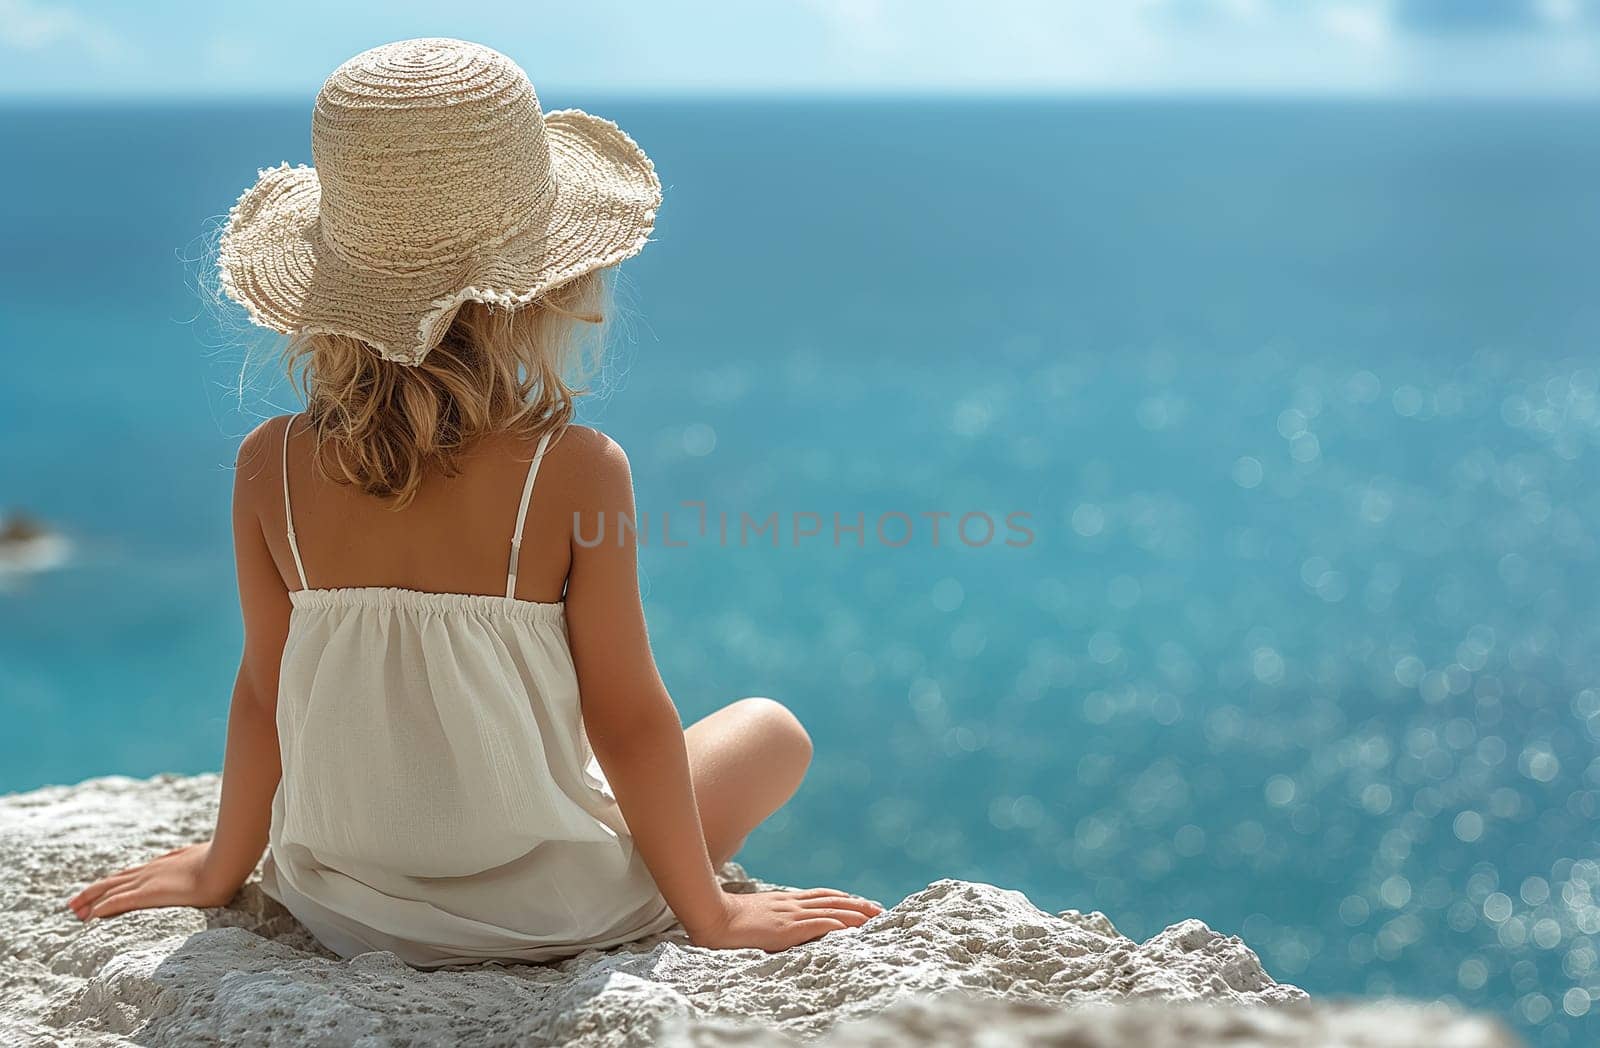 Child sitting by the sea, gazing into the horizon. by Hype2art